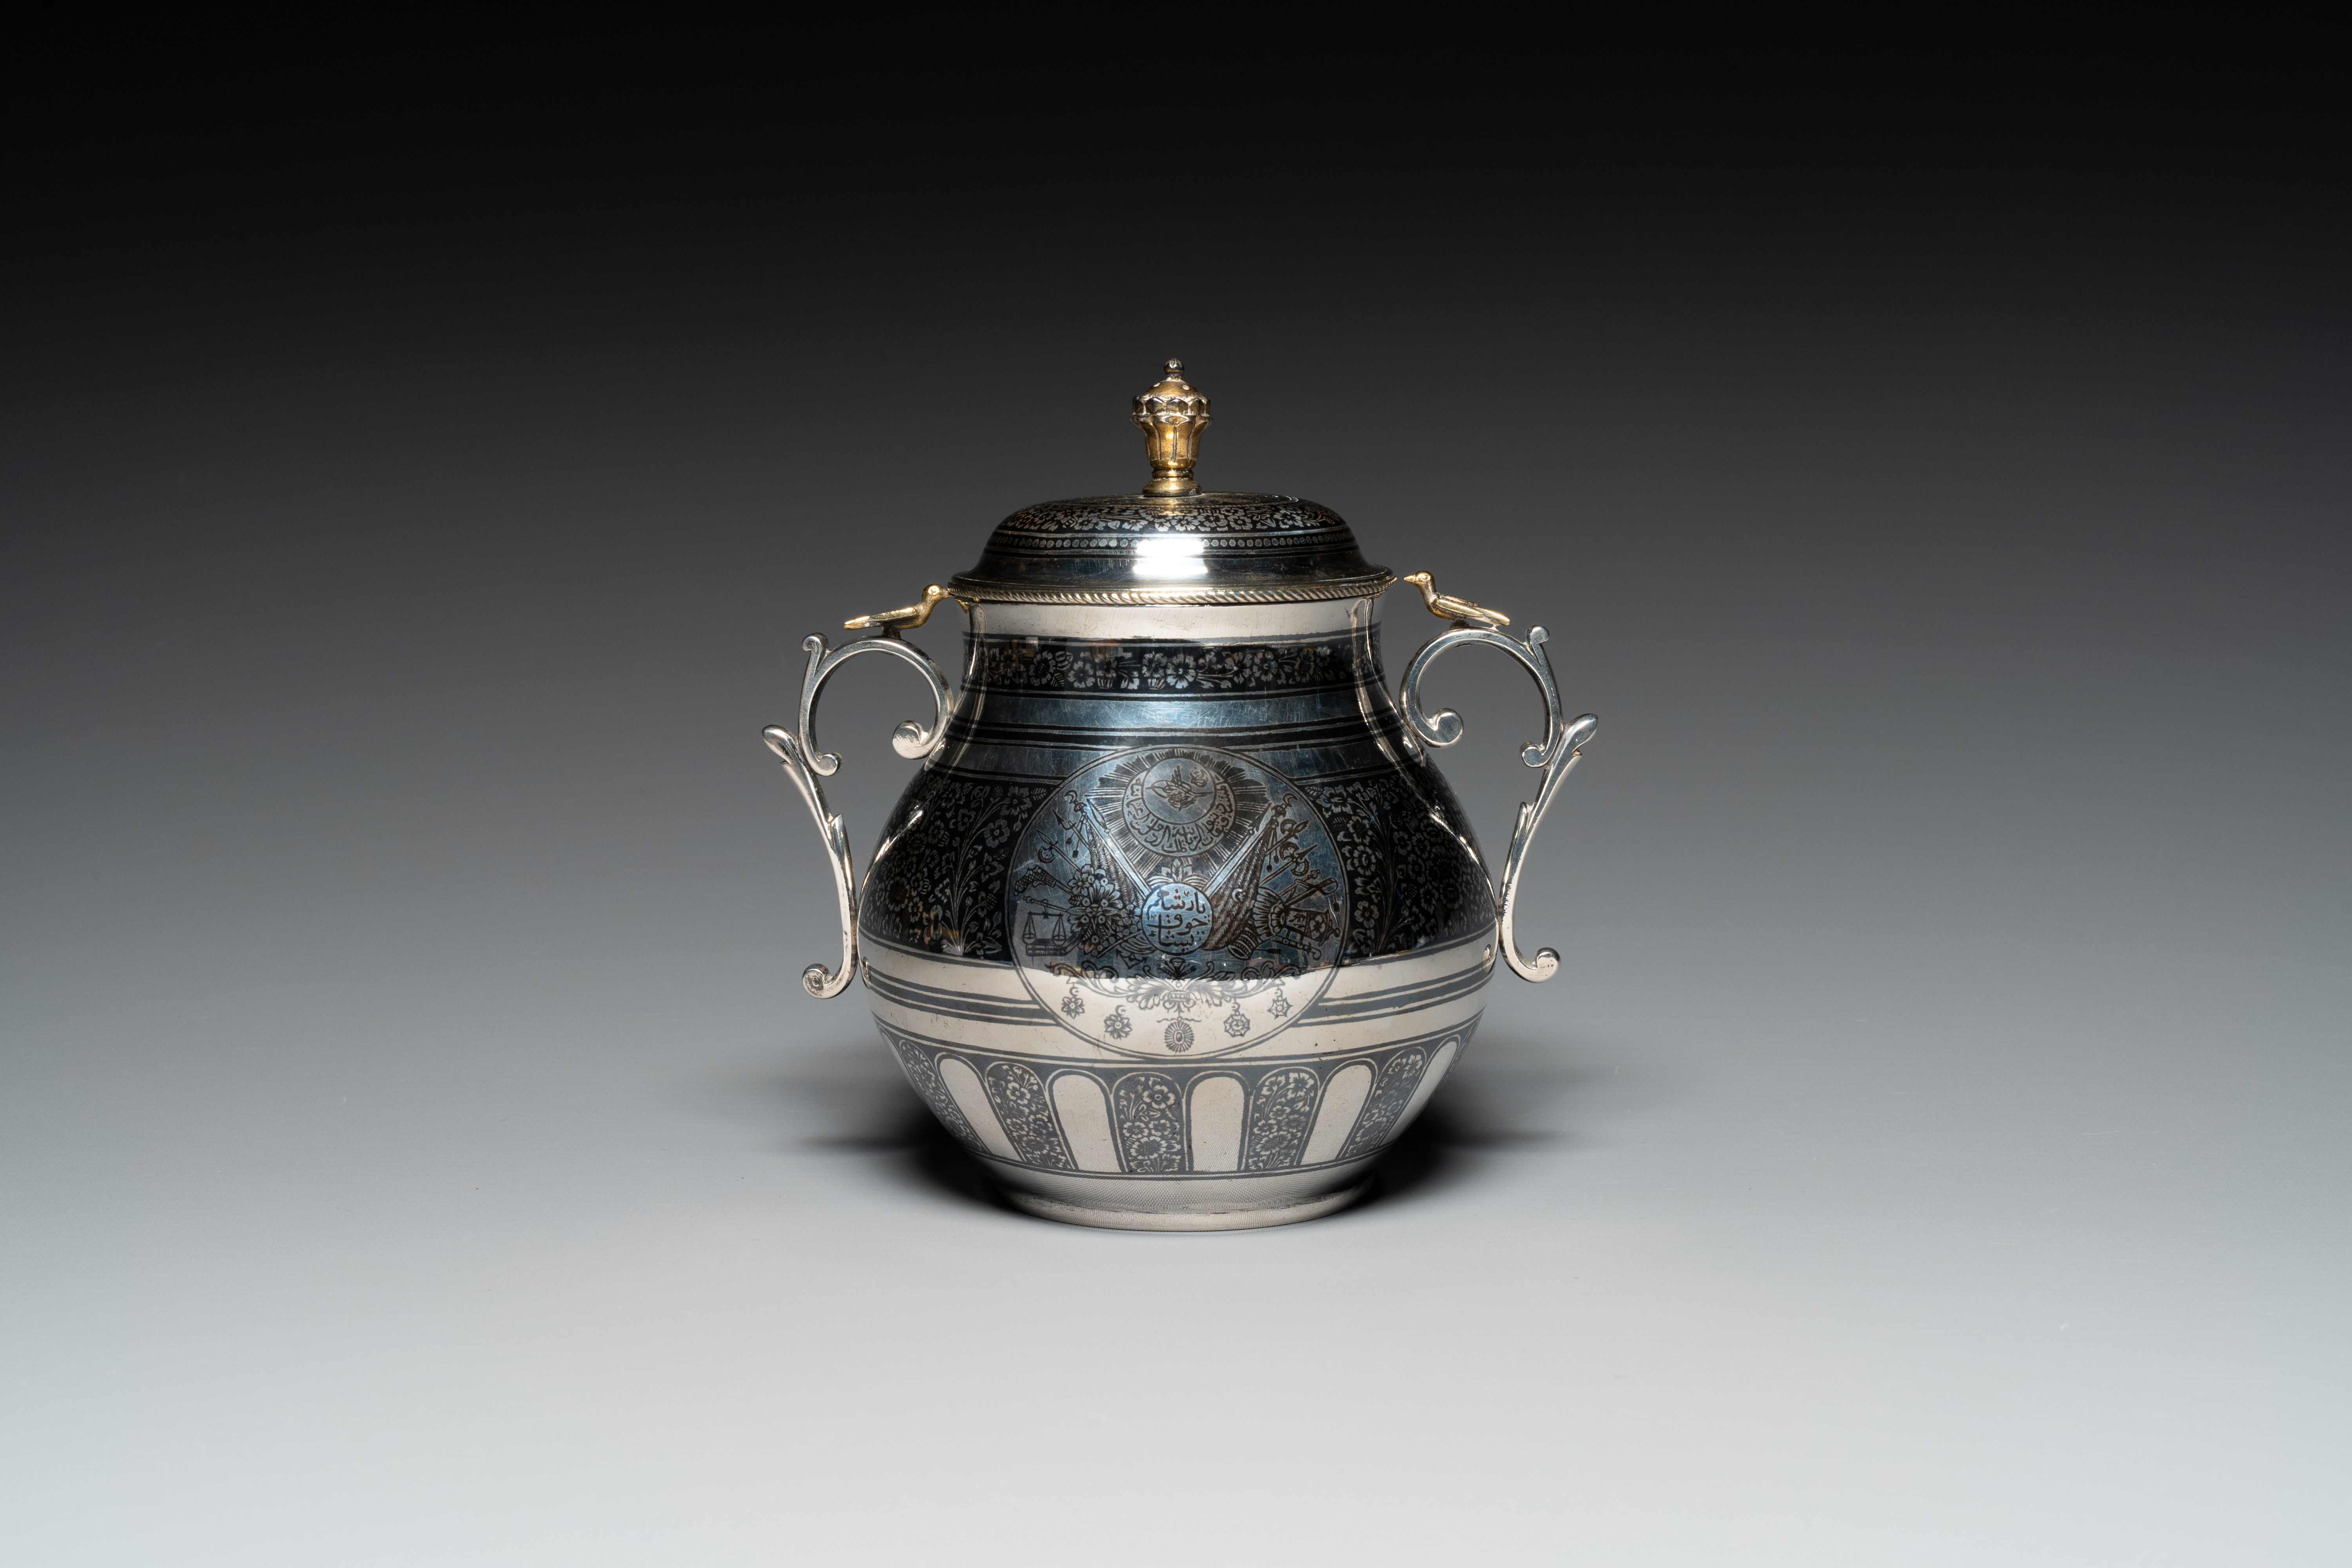 An Ottoman parcel-gilt niello silver vessel and cover, Turkey, period of Sultan Abdulhamid II (1876- - Image 2 of 6